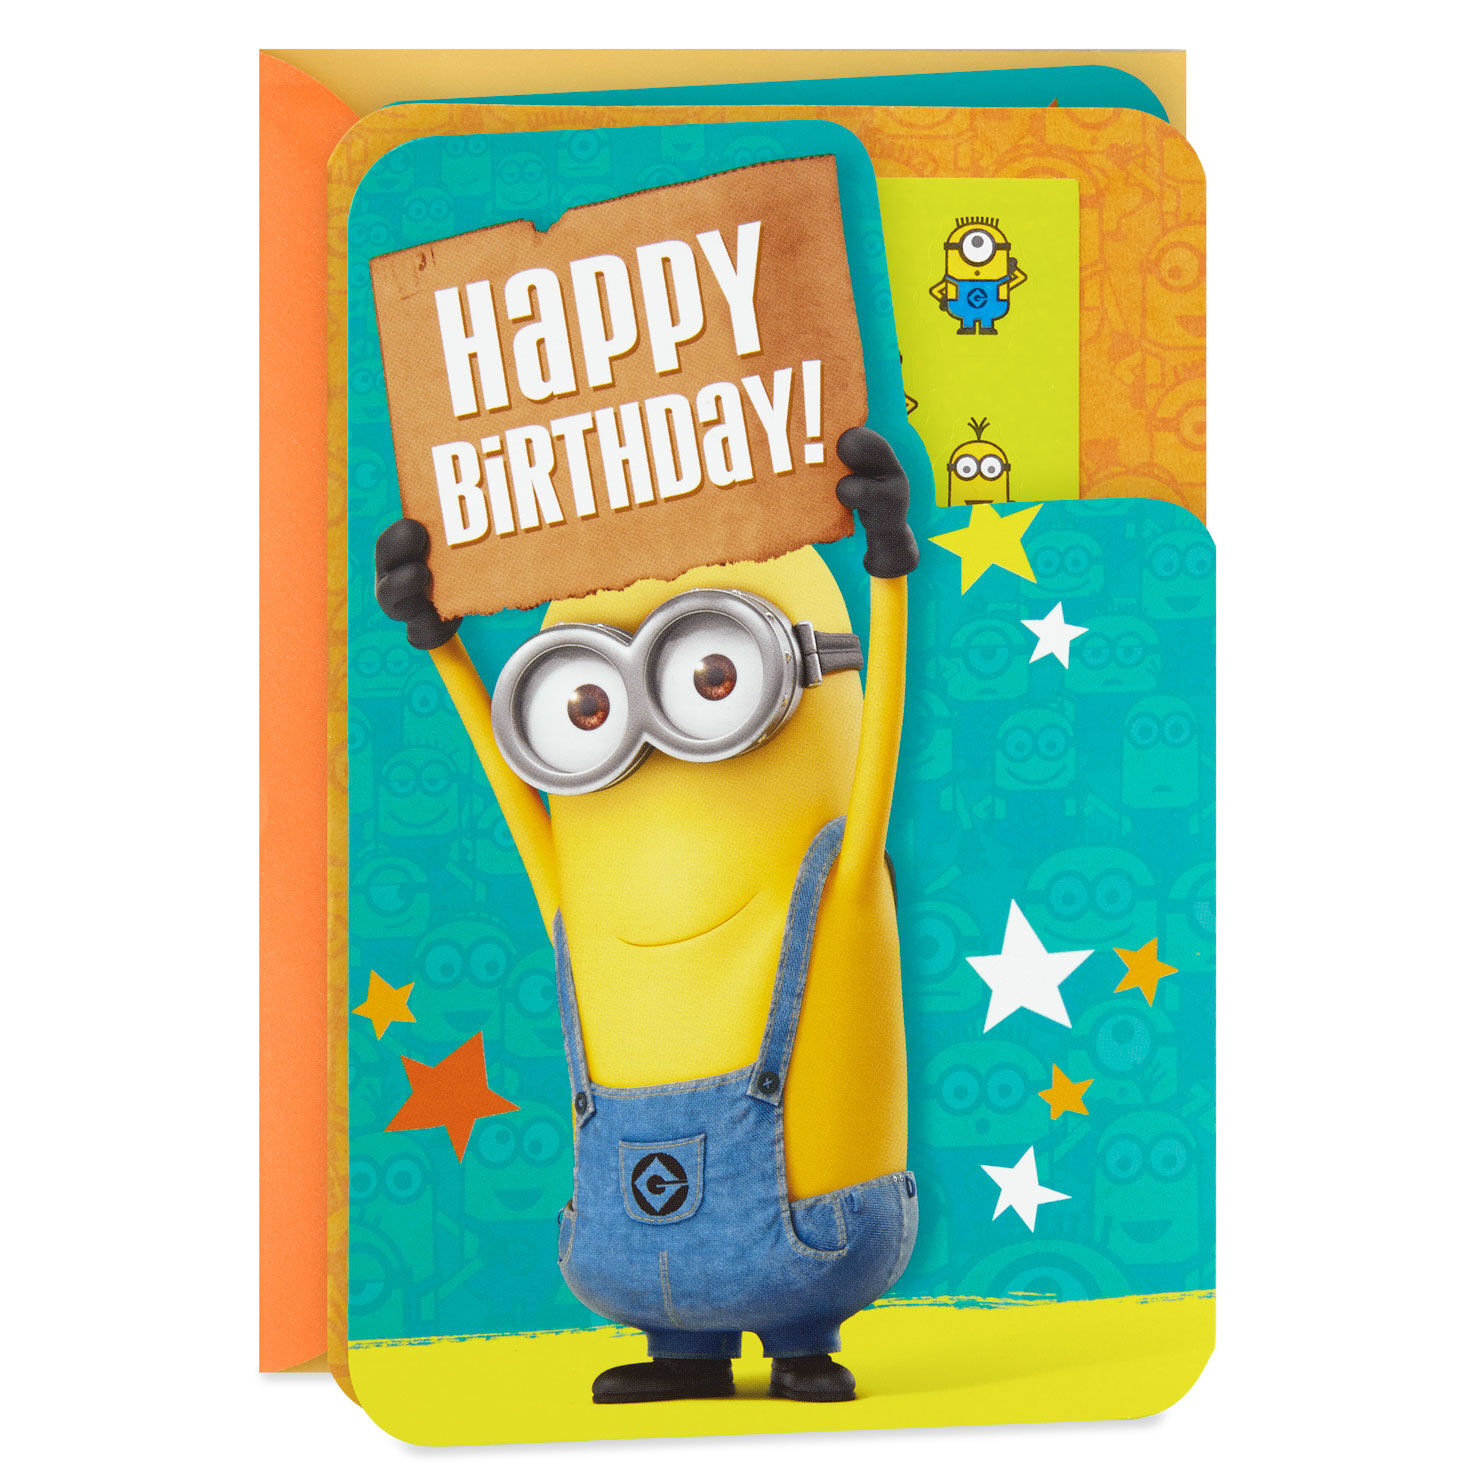 Minions Age 9 Today Despicable Me 9th Birthday Card Lets Get Despicable 